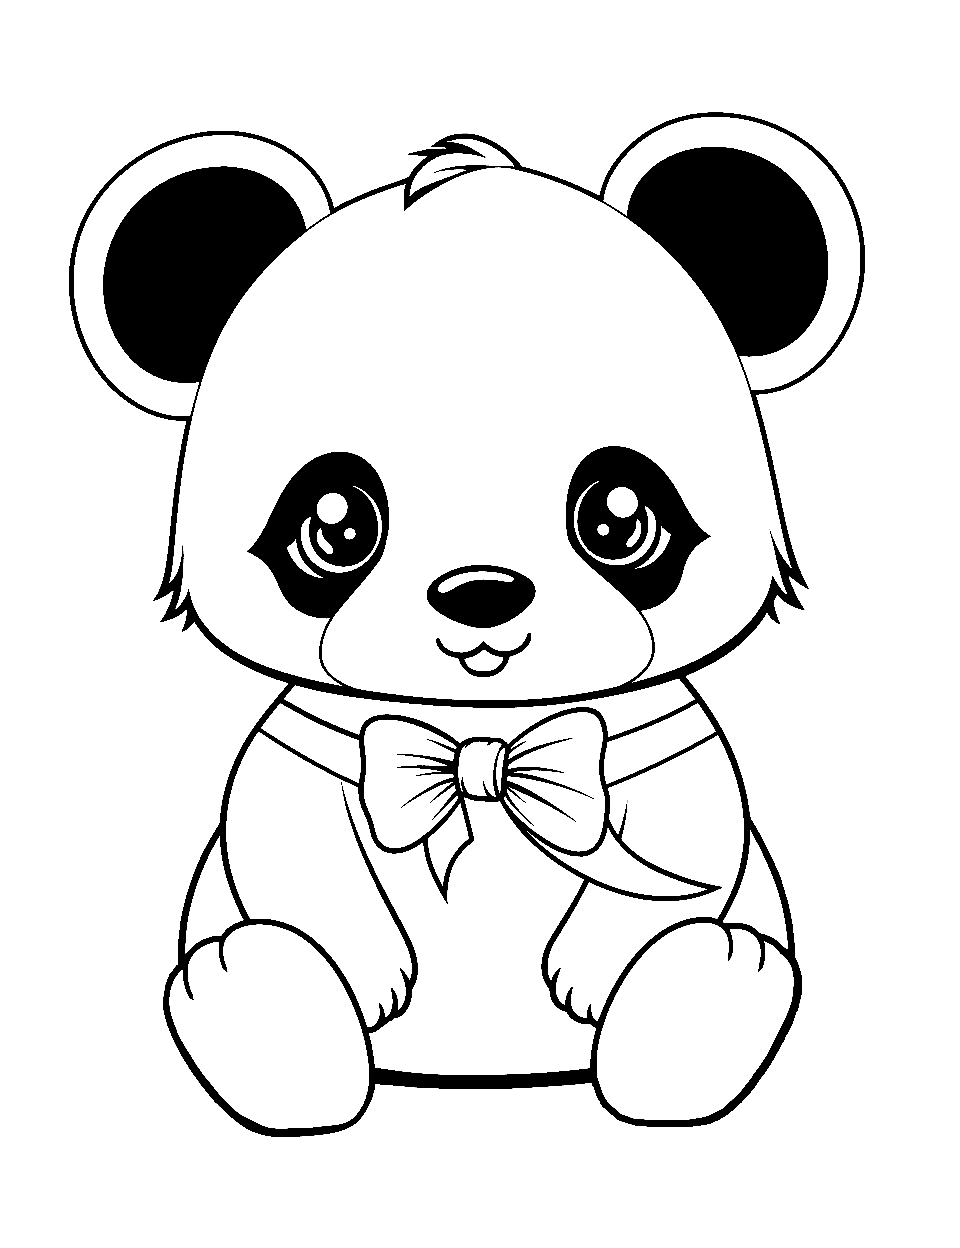 Girl Panda with a Bow Coloring Page - A sweet girl panda wearing a bow on her ear sitting politely.